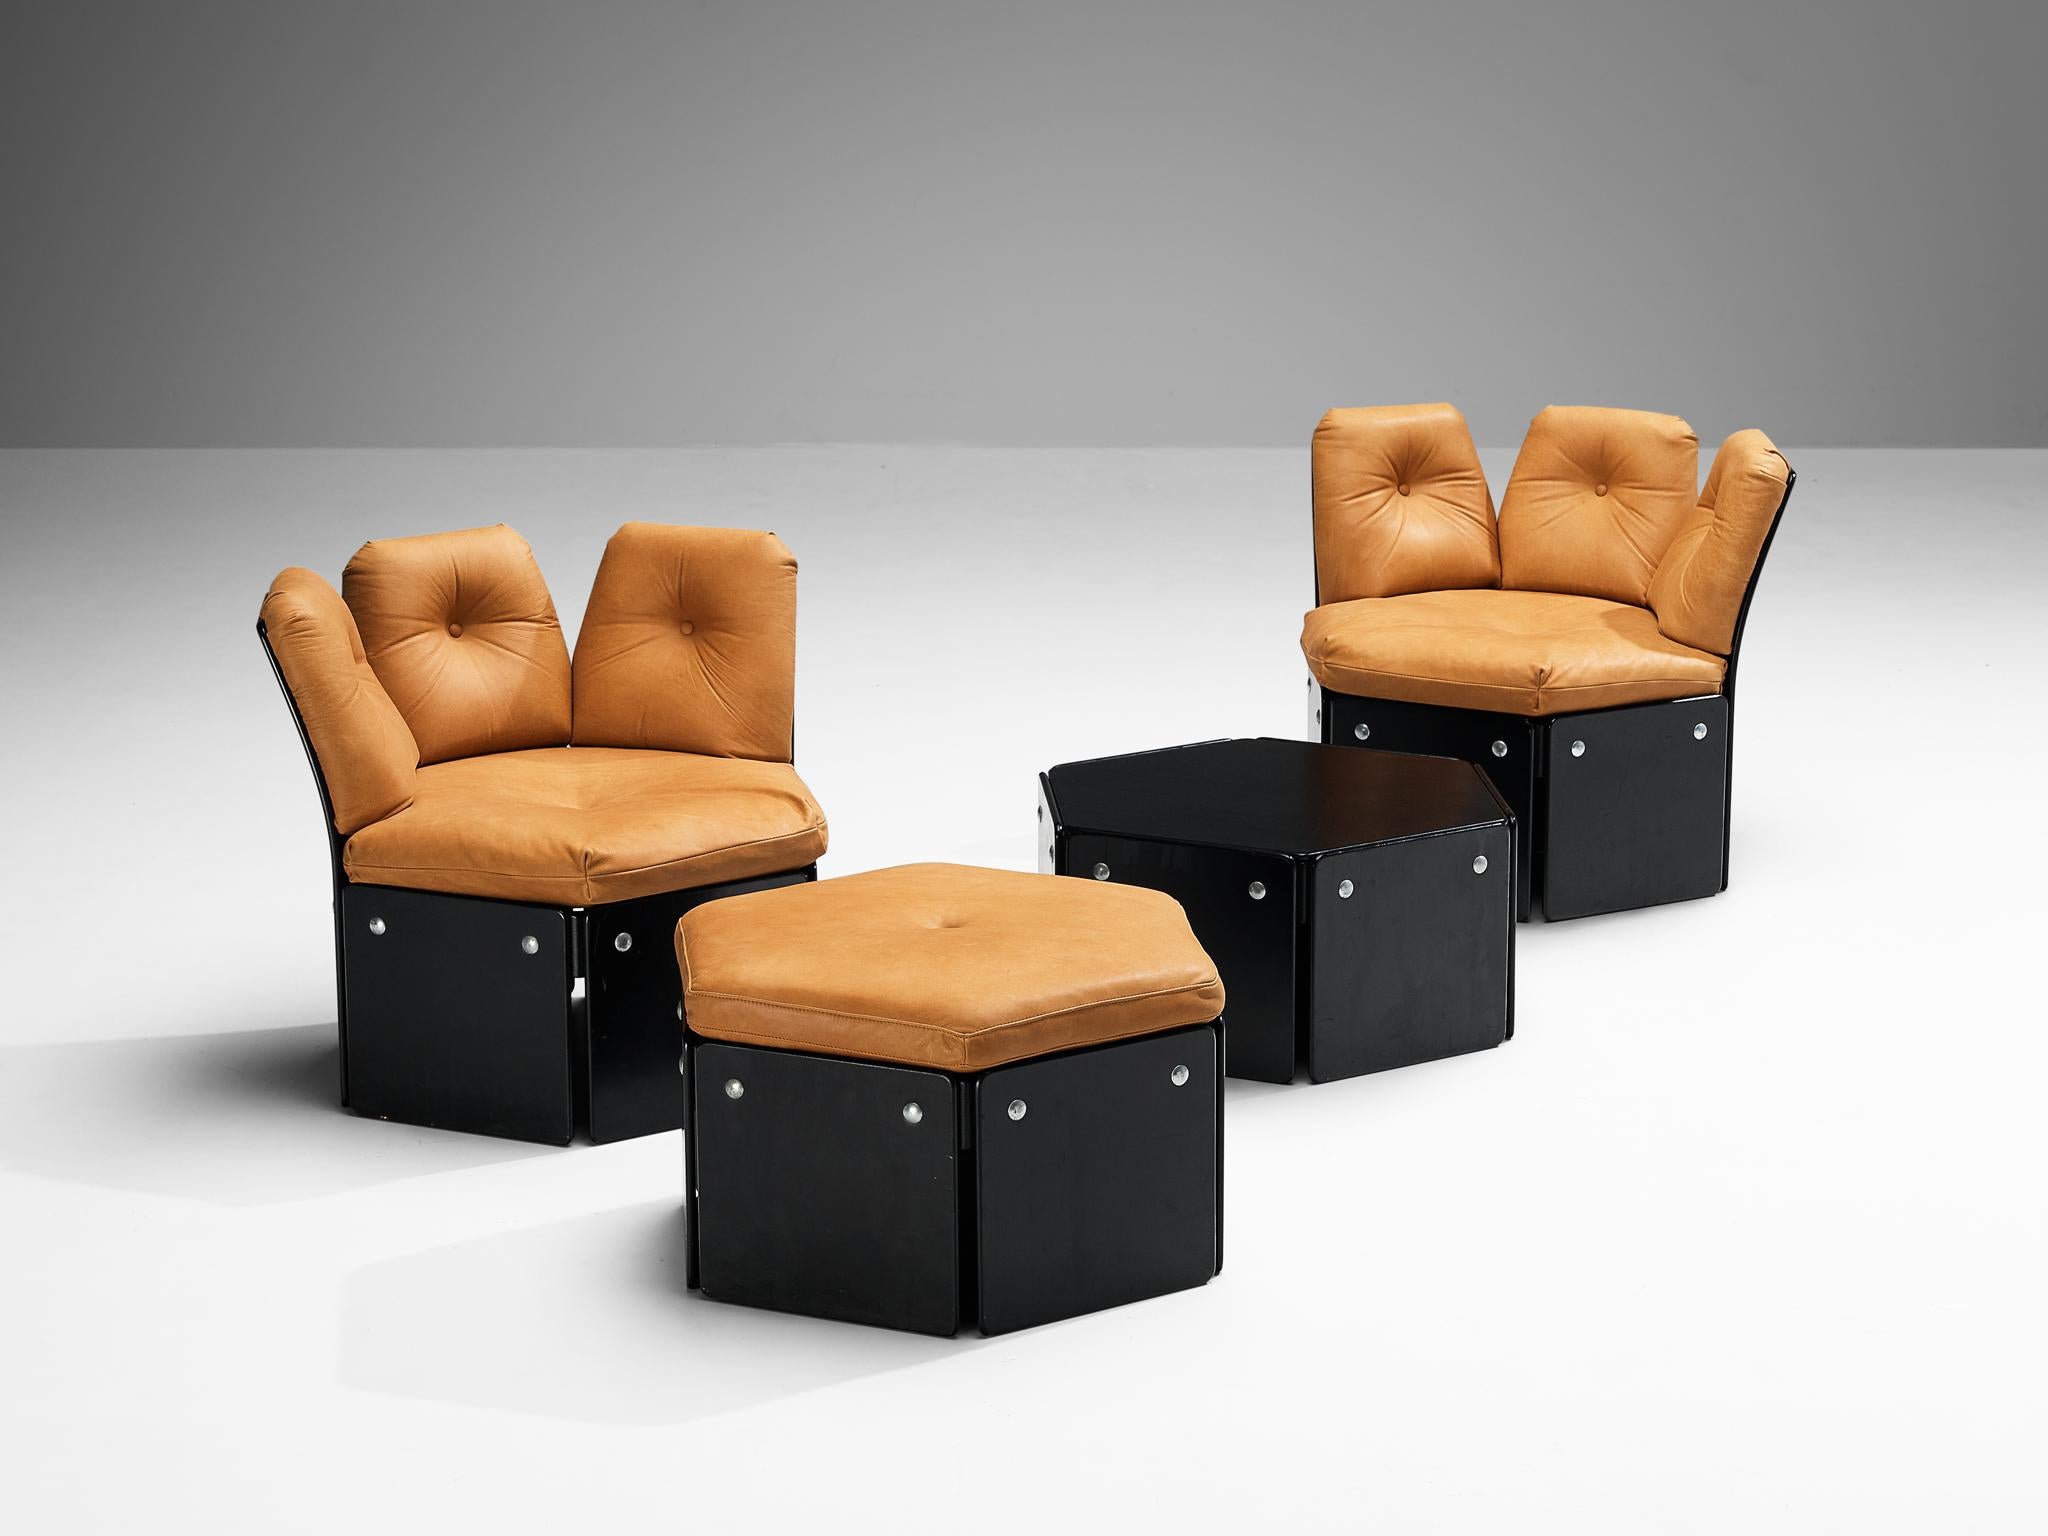 Illum Wikkelsø for CFC Silkeborg, pair of lounge chairs with ottoman and side table, leather, lacquered wood, metal, Denmark, 1970s

Exiting and rare to come by modular sitting set designed by Illum Wikkelsø in the 1970s. These modular designs are